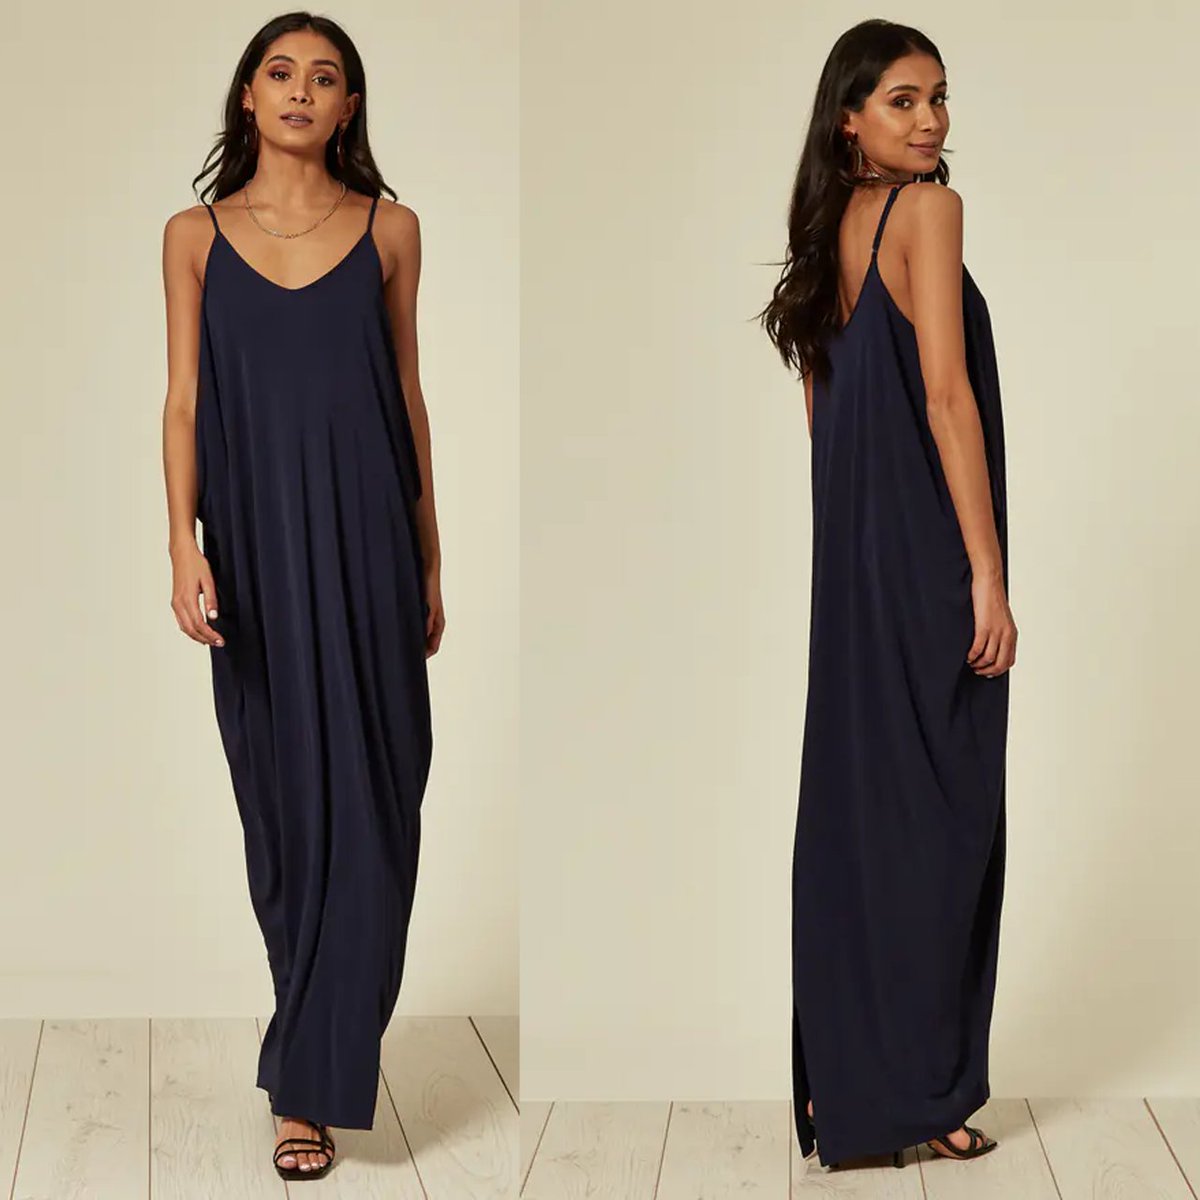 Our Athena strappy, maxi dress in navy hangs effortlessly, adding understated glamour to any wardrobe. Sophisticated and perfect for day and evening - just dress up with statement jewellery and a pair of heels. 💙 #madeinlondon #summerdress #weddin #weddingseason #summerparty